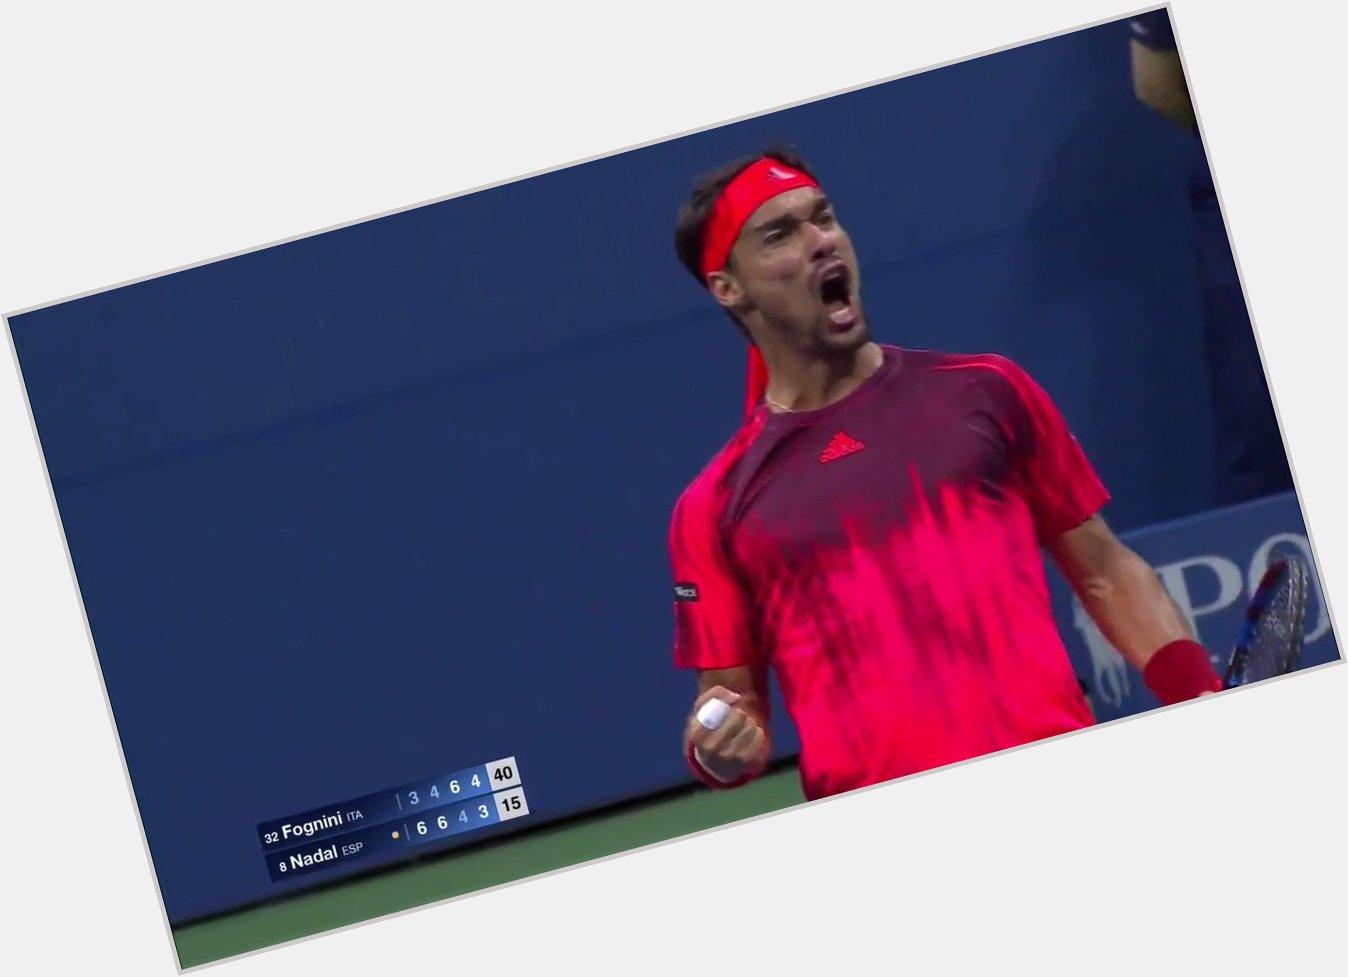 Two sets down to Rafa Nadal in 2015 and Fabio Fognini didn\t blink.

Happy birthday,    